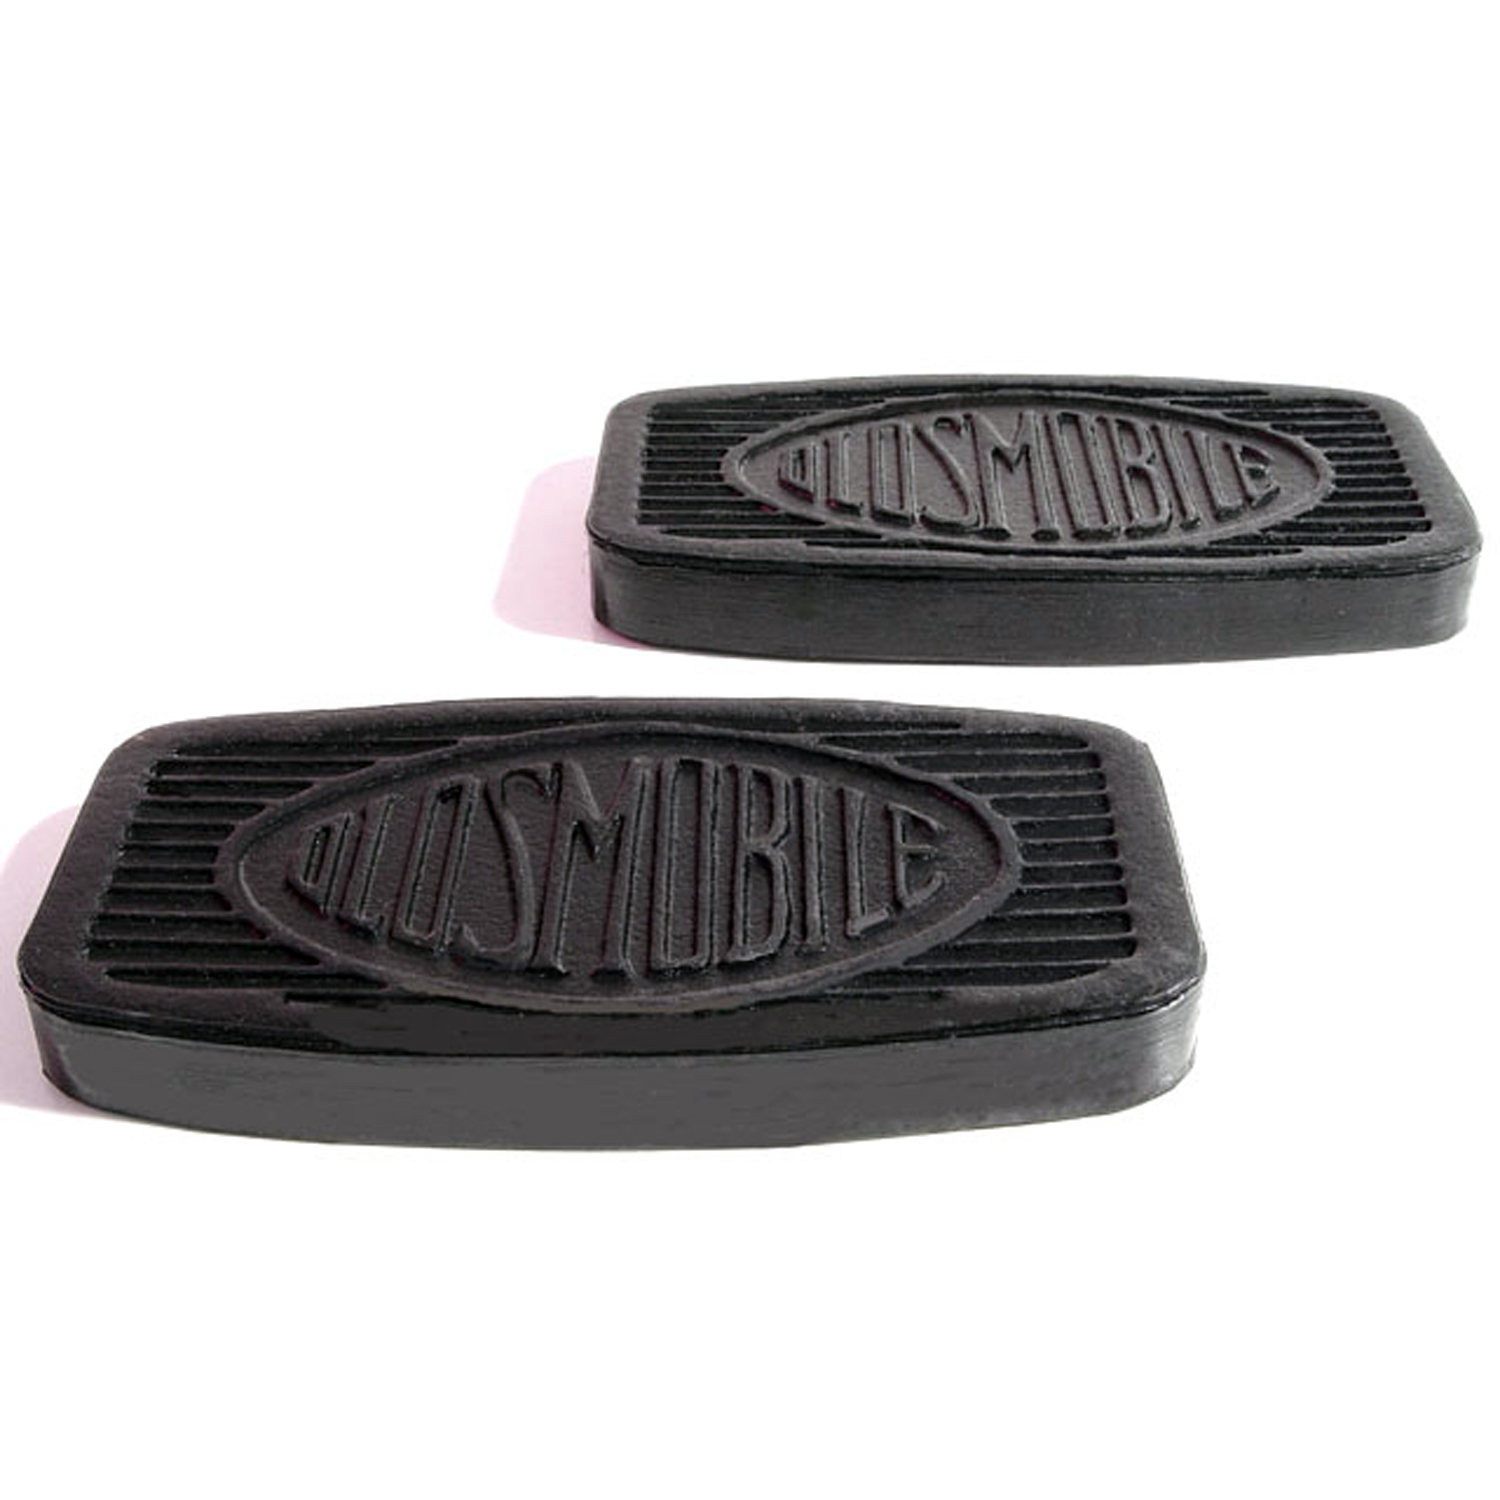 1933 Oldsmobile Model L-33 Clutch and Brake Pedal Pads.  3-1/2 wide X 1-3/16 long-CB 95